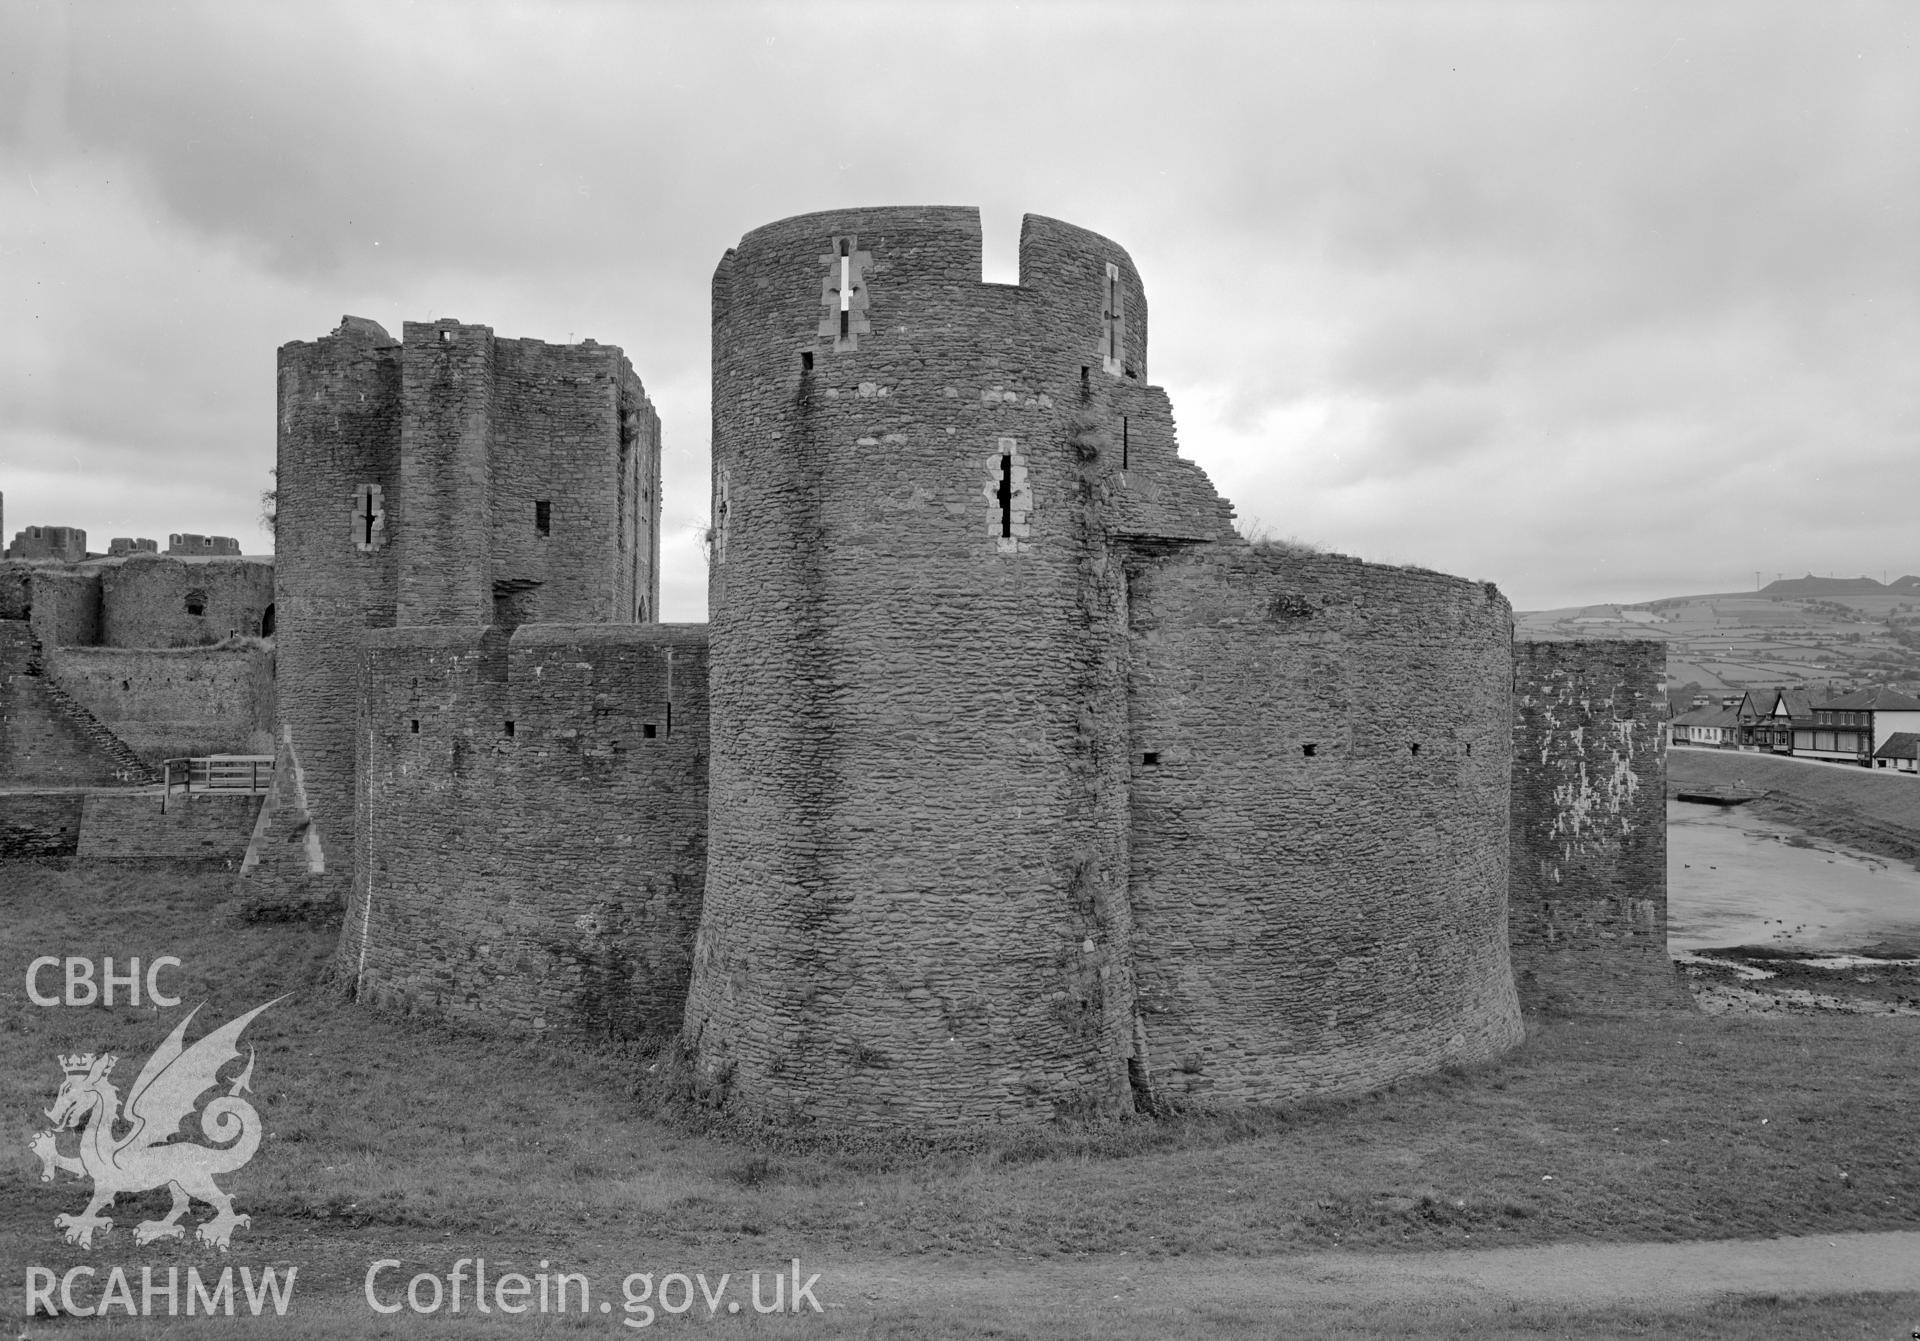 D.O.E photographs of Caerphilly Castle - south platform and 'D' Tower from south.